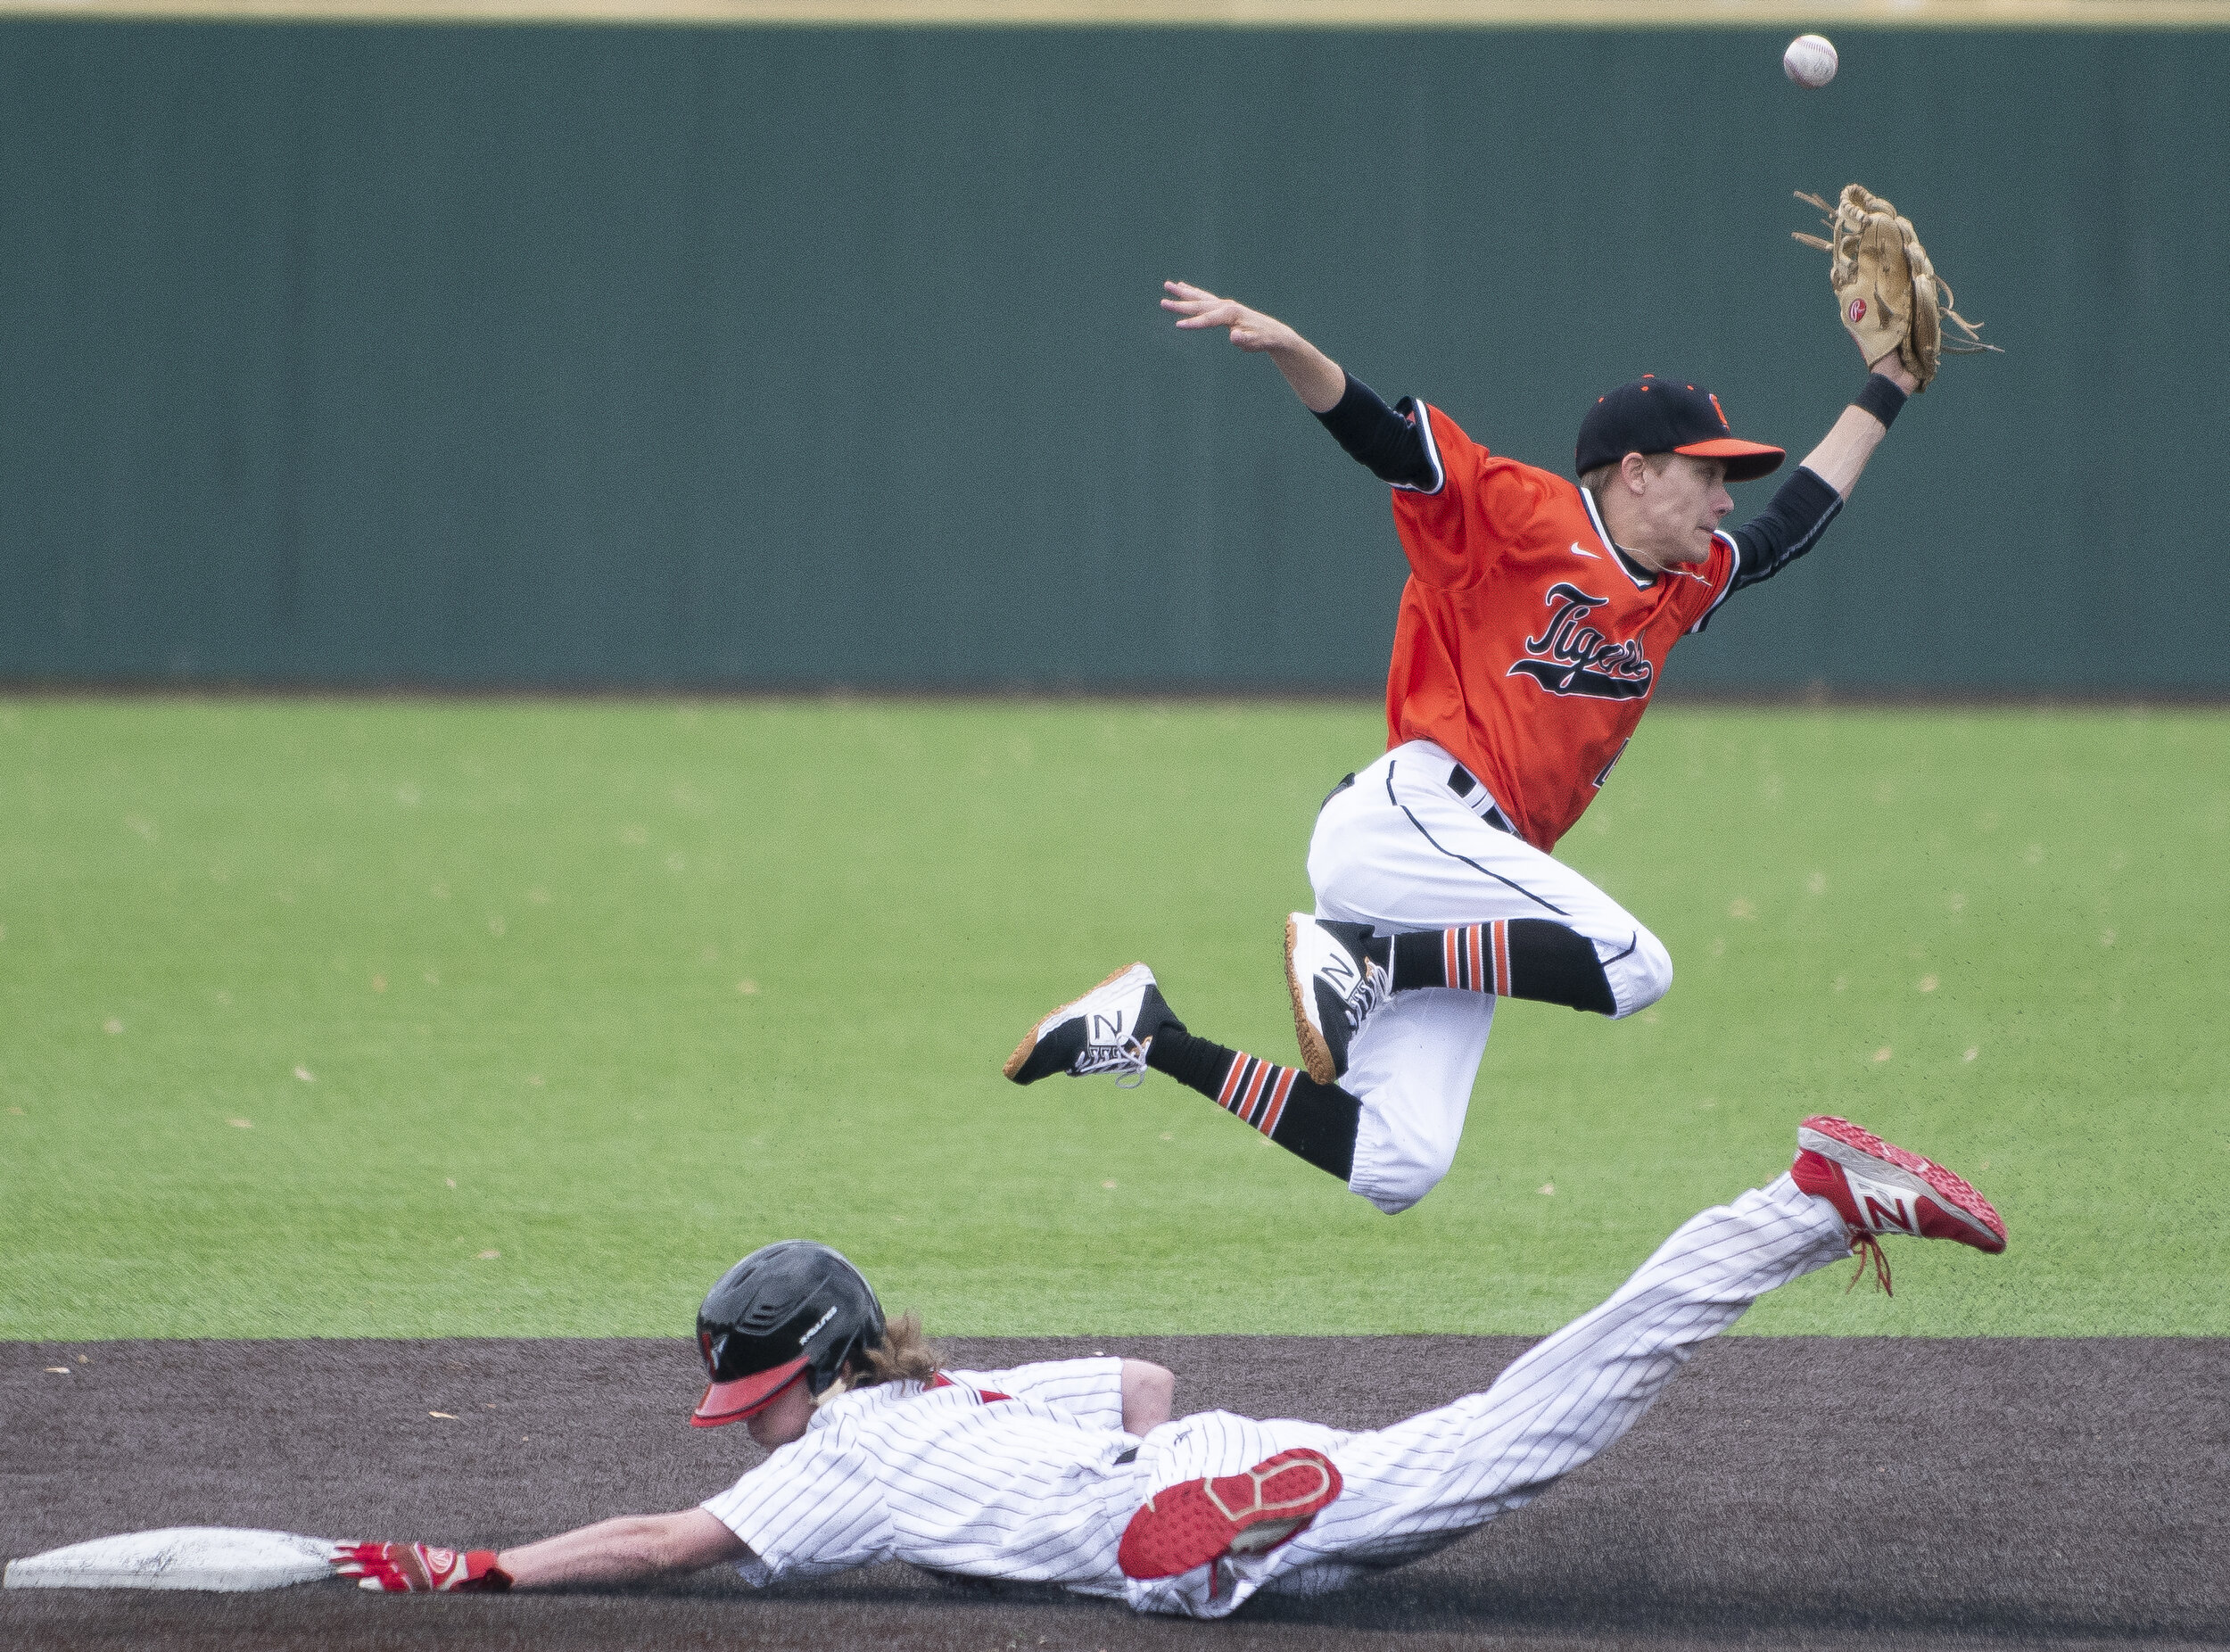  Cape Central's Luke Laramore (4) attempts to grab the ball as Jackson's Kalin Ellis (1) goes to second during Jackson's 15-0 win over Cape Central in the SEMO Conference semifinals April 27 at Capaha Field in Cape Girardeau, Missouri.  